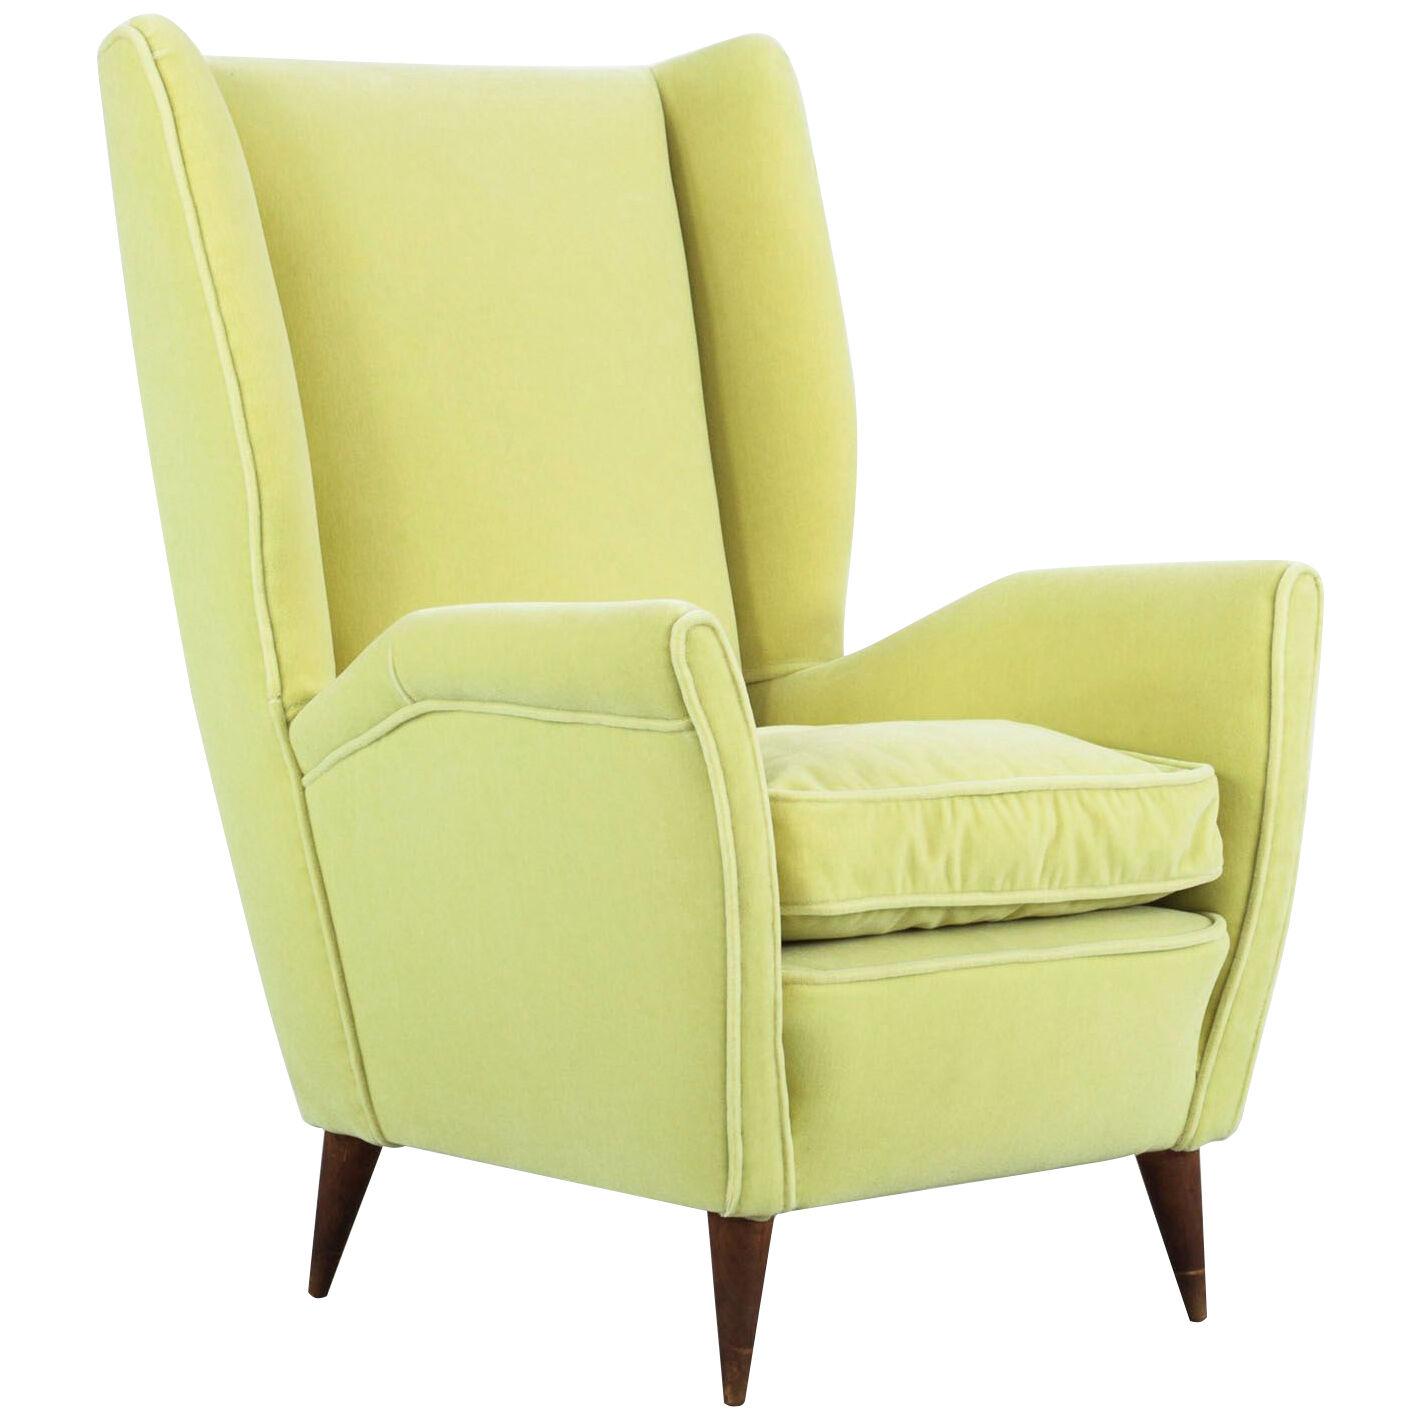 Italian Yellow Wing Chair, Produced by I.S.A. Bergamo, 1950s